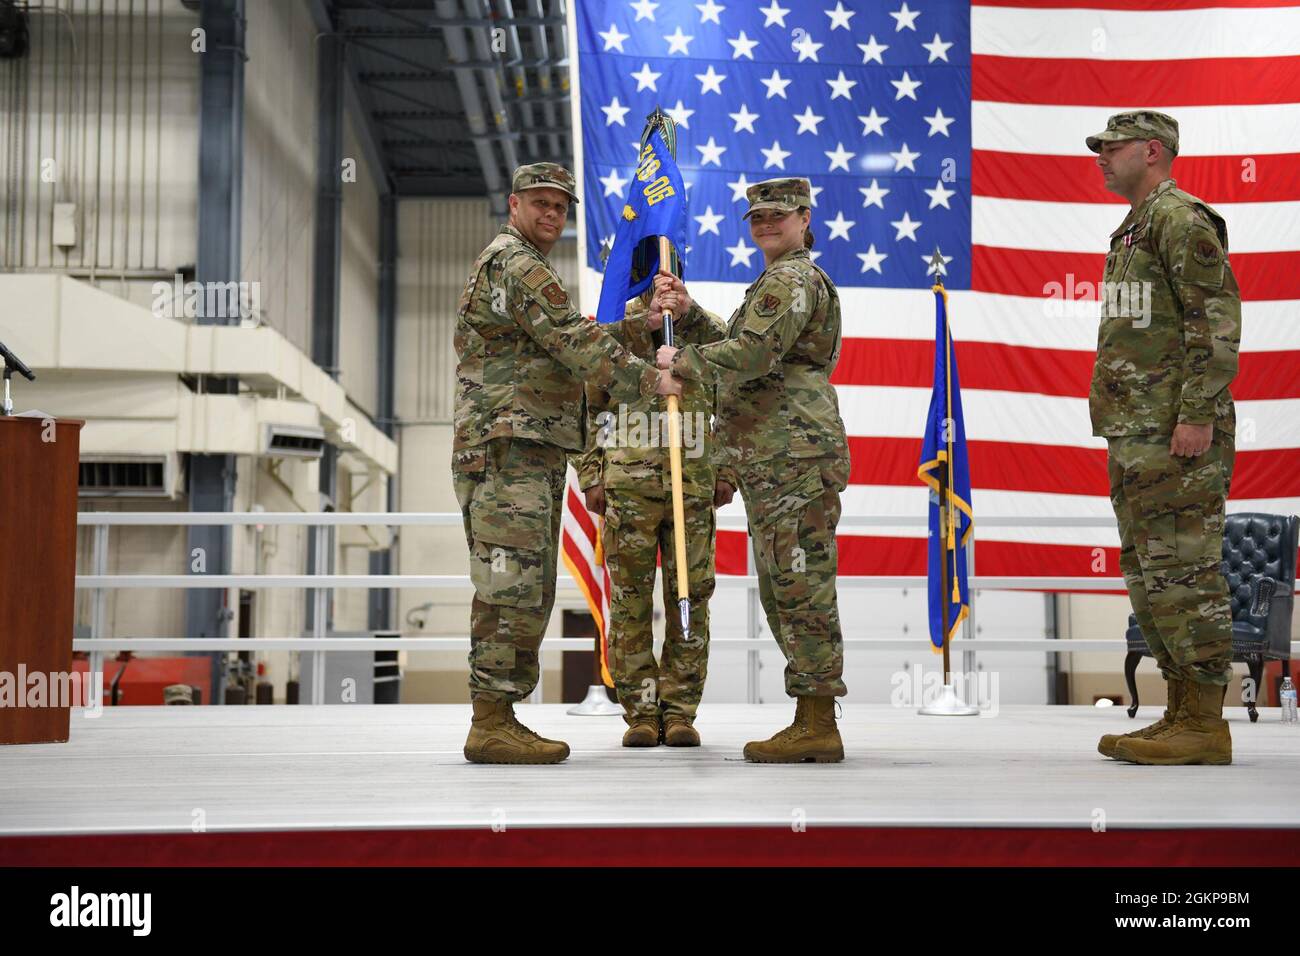 Col. Jason Dillon, 319th Operations Group commander, passes the guidon to Lt. Col. Susan Martin, 348th Reconnaissance Squadron incoming commander, the Legion of Merit during the 348 RS change of command ceremony at Grand Forks Air Force Base, N.D., June 11, 2021. The 348 RS is a squadron operating under the 319 OG. Stock Photo